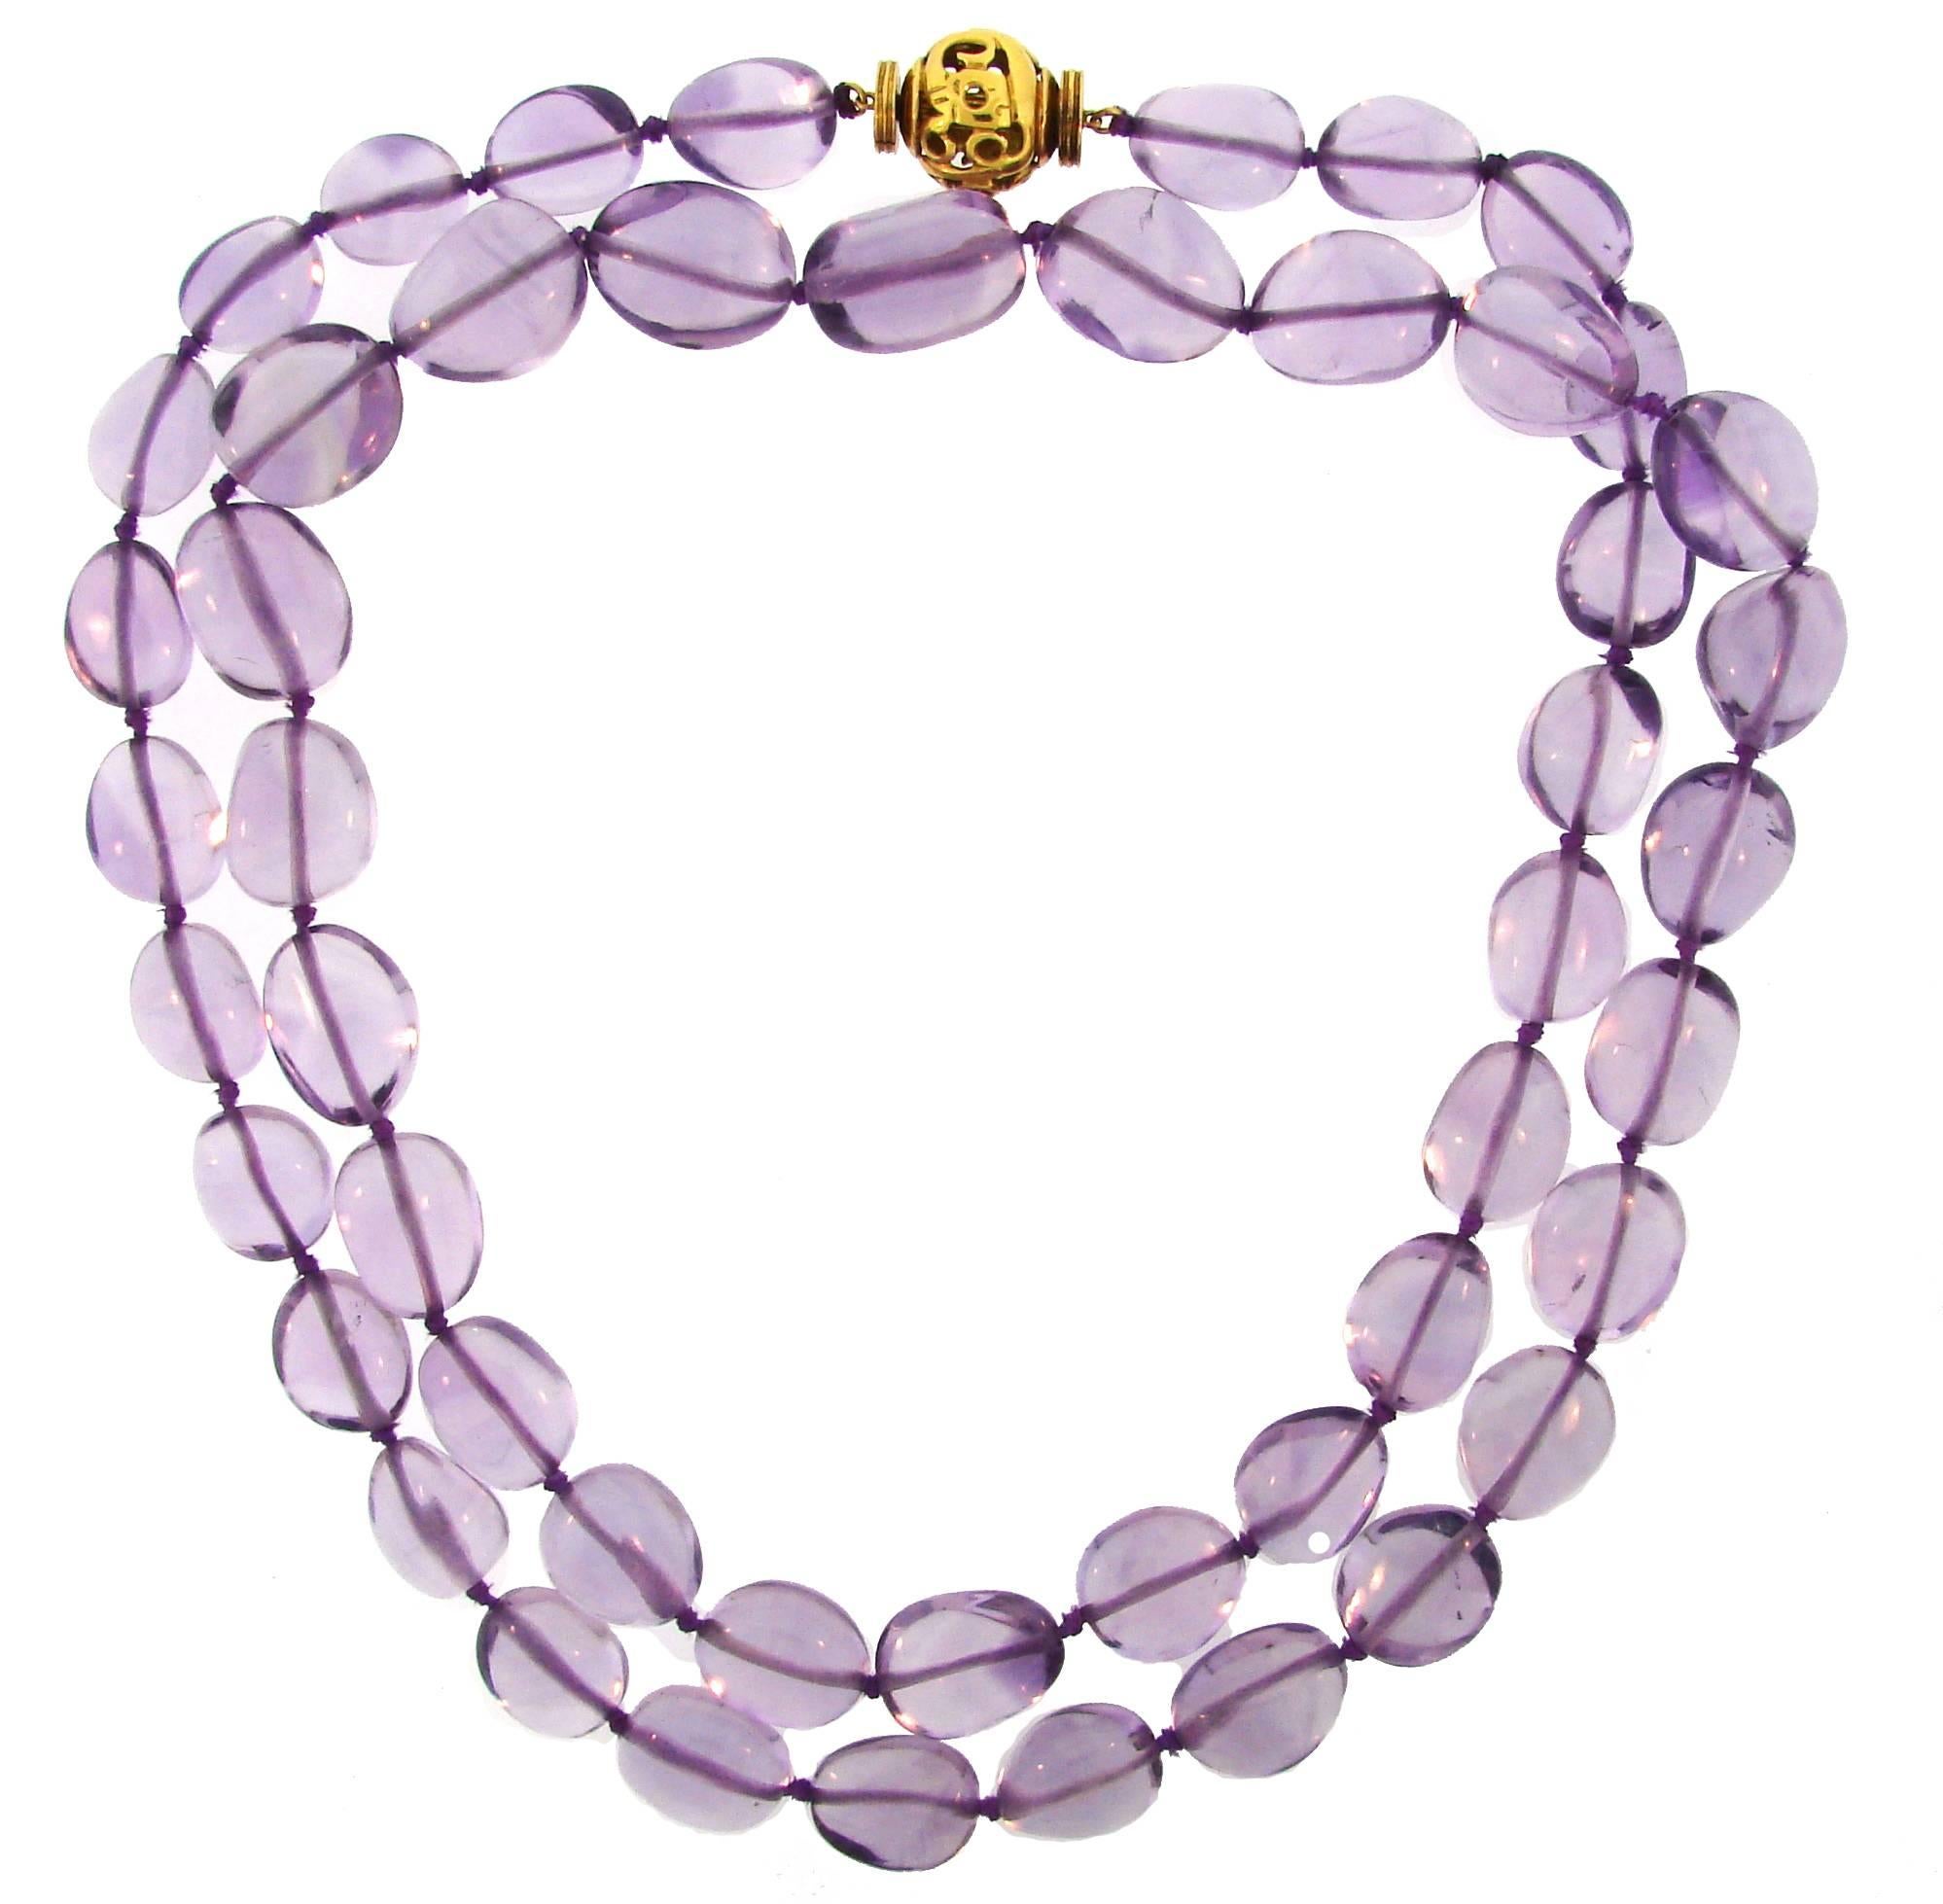 Verdura Amethyst Bead Strand Necklace with Gold Clasp